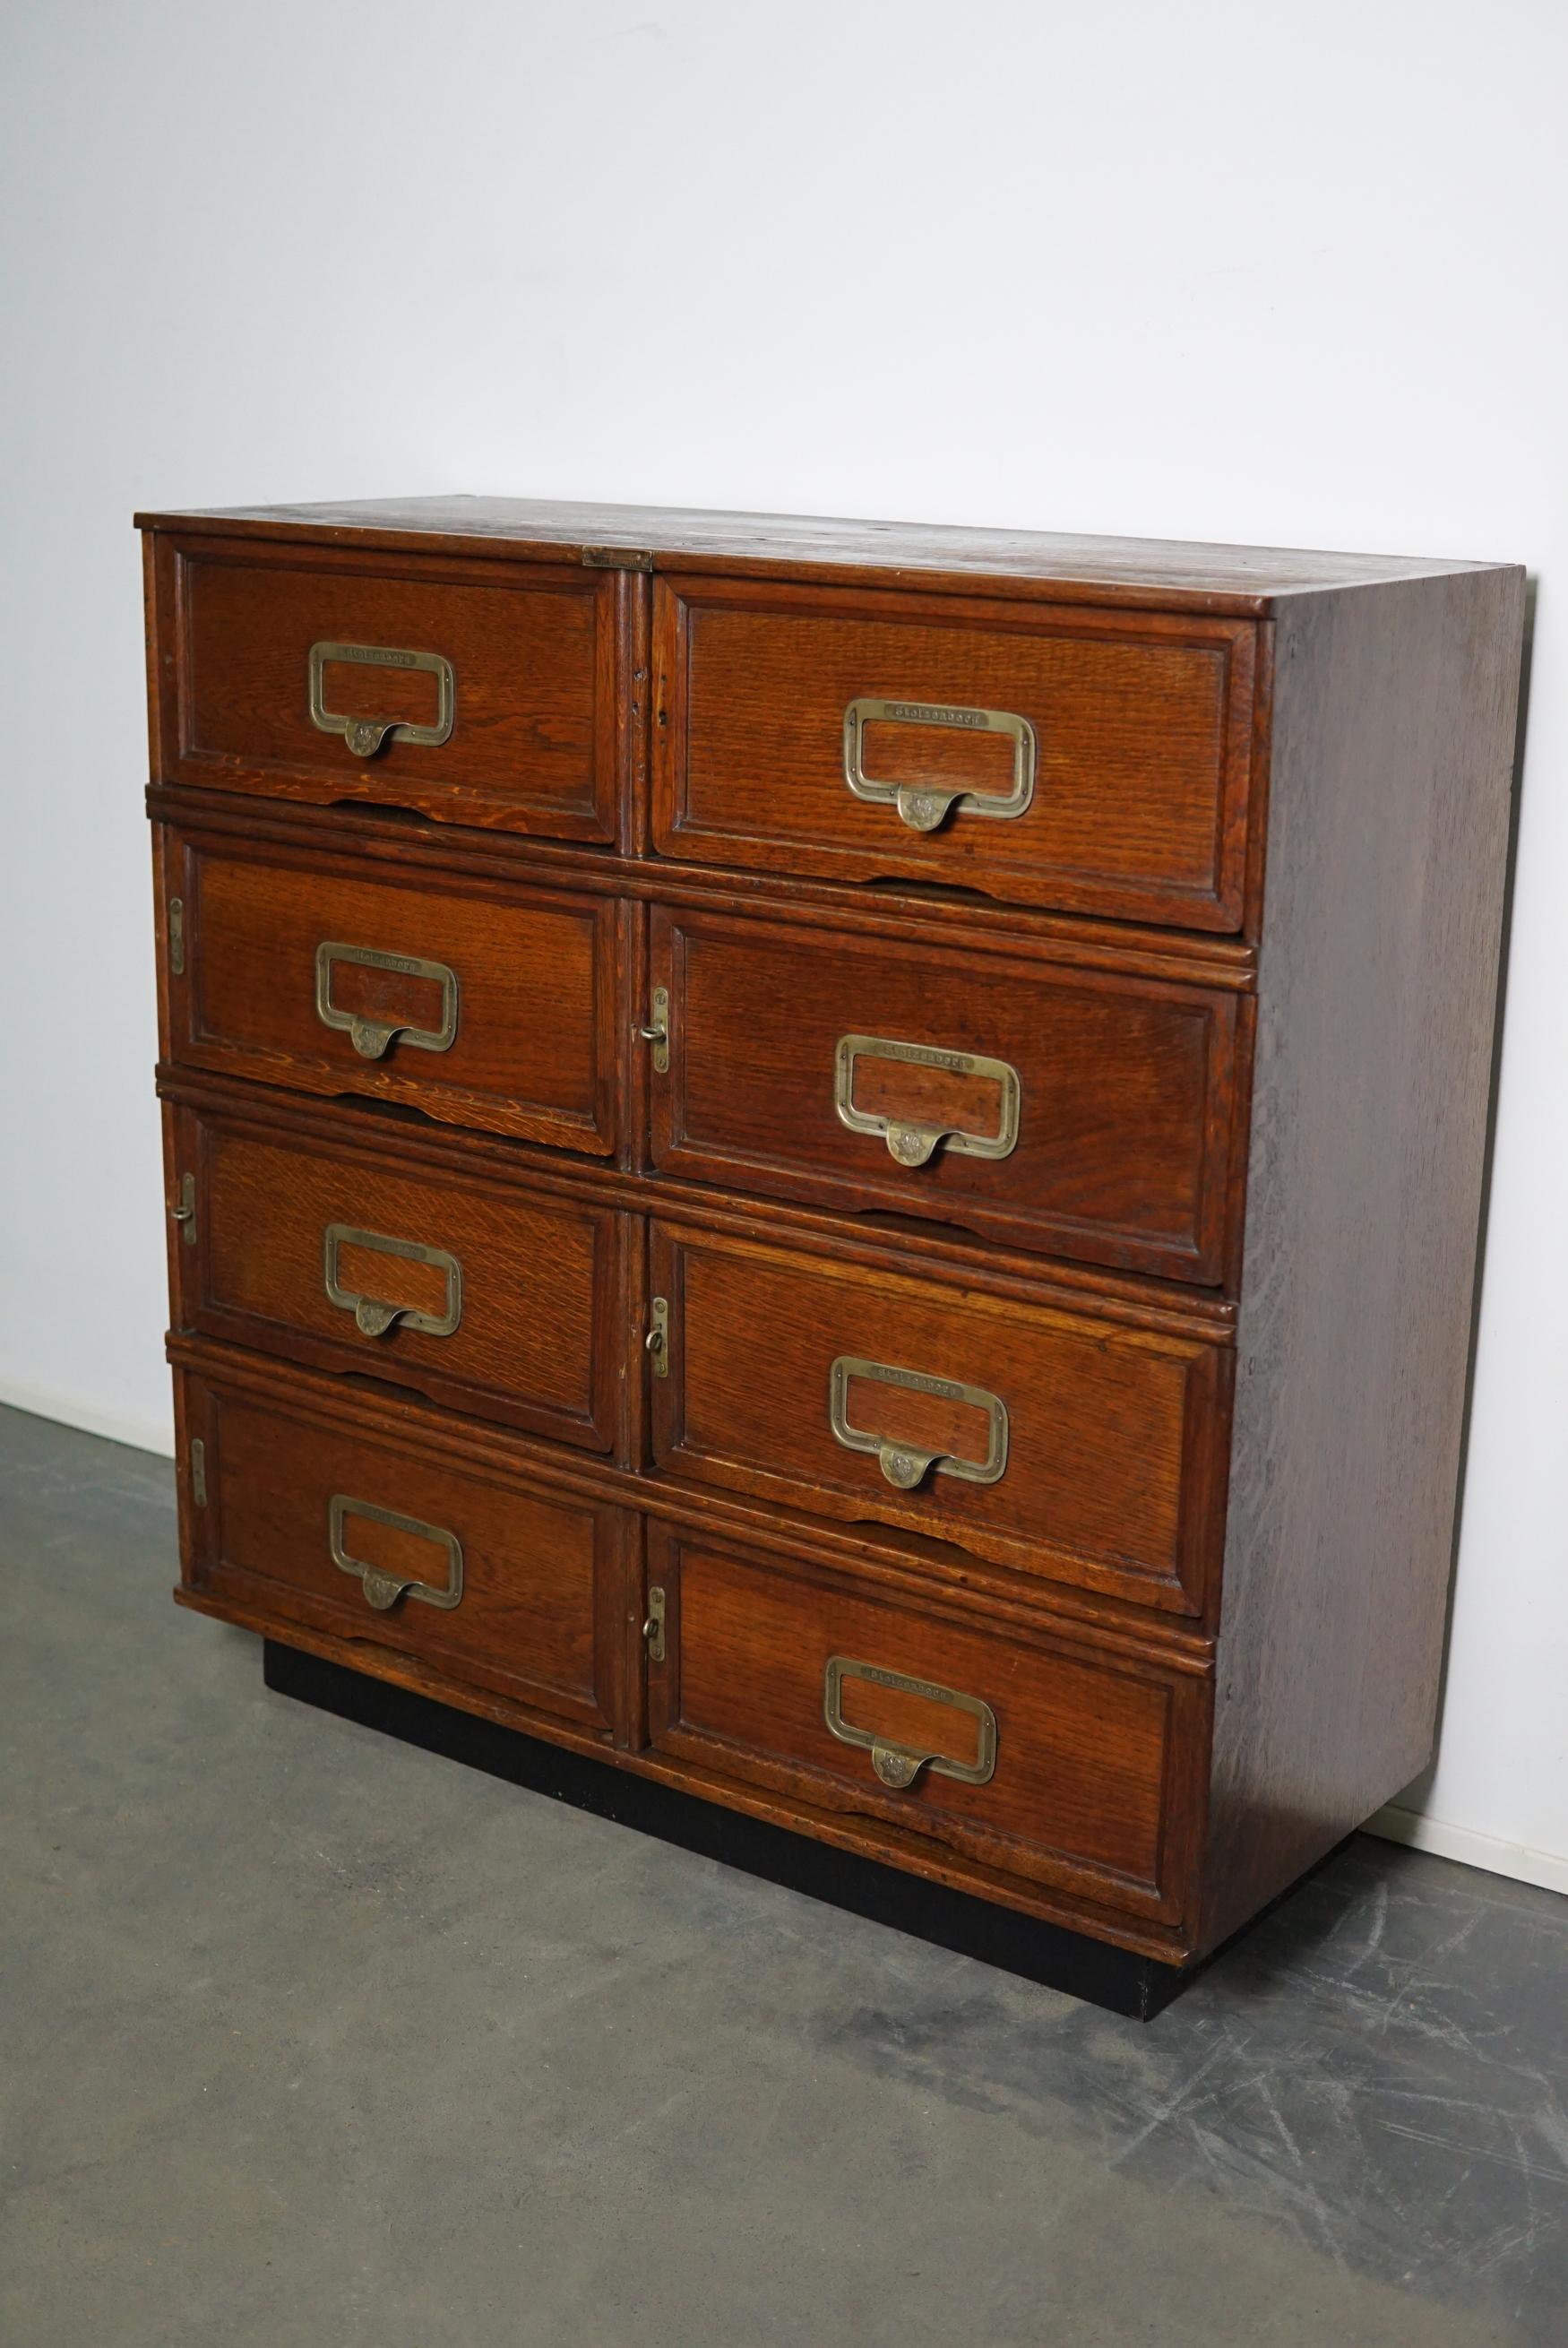 Industrial Antique German Oak Filing Cabinet with Drop Down Doors by Stolzenberg, 1930s